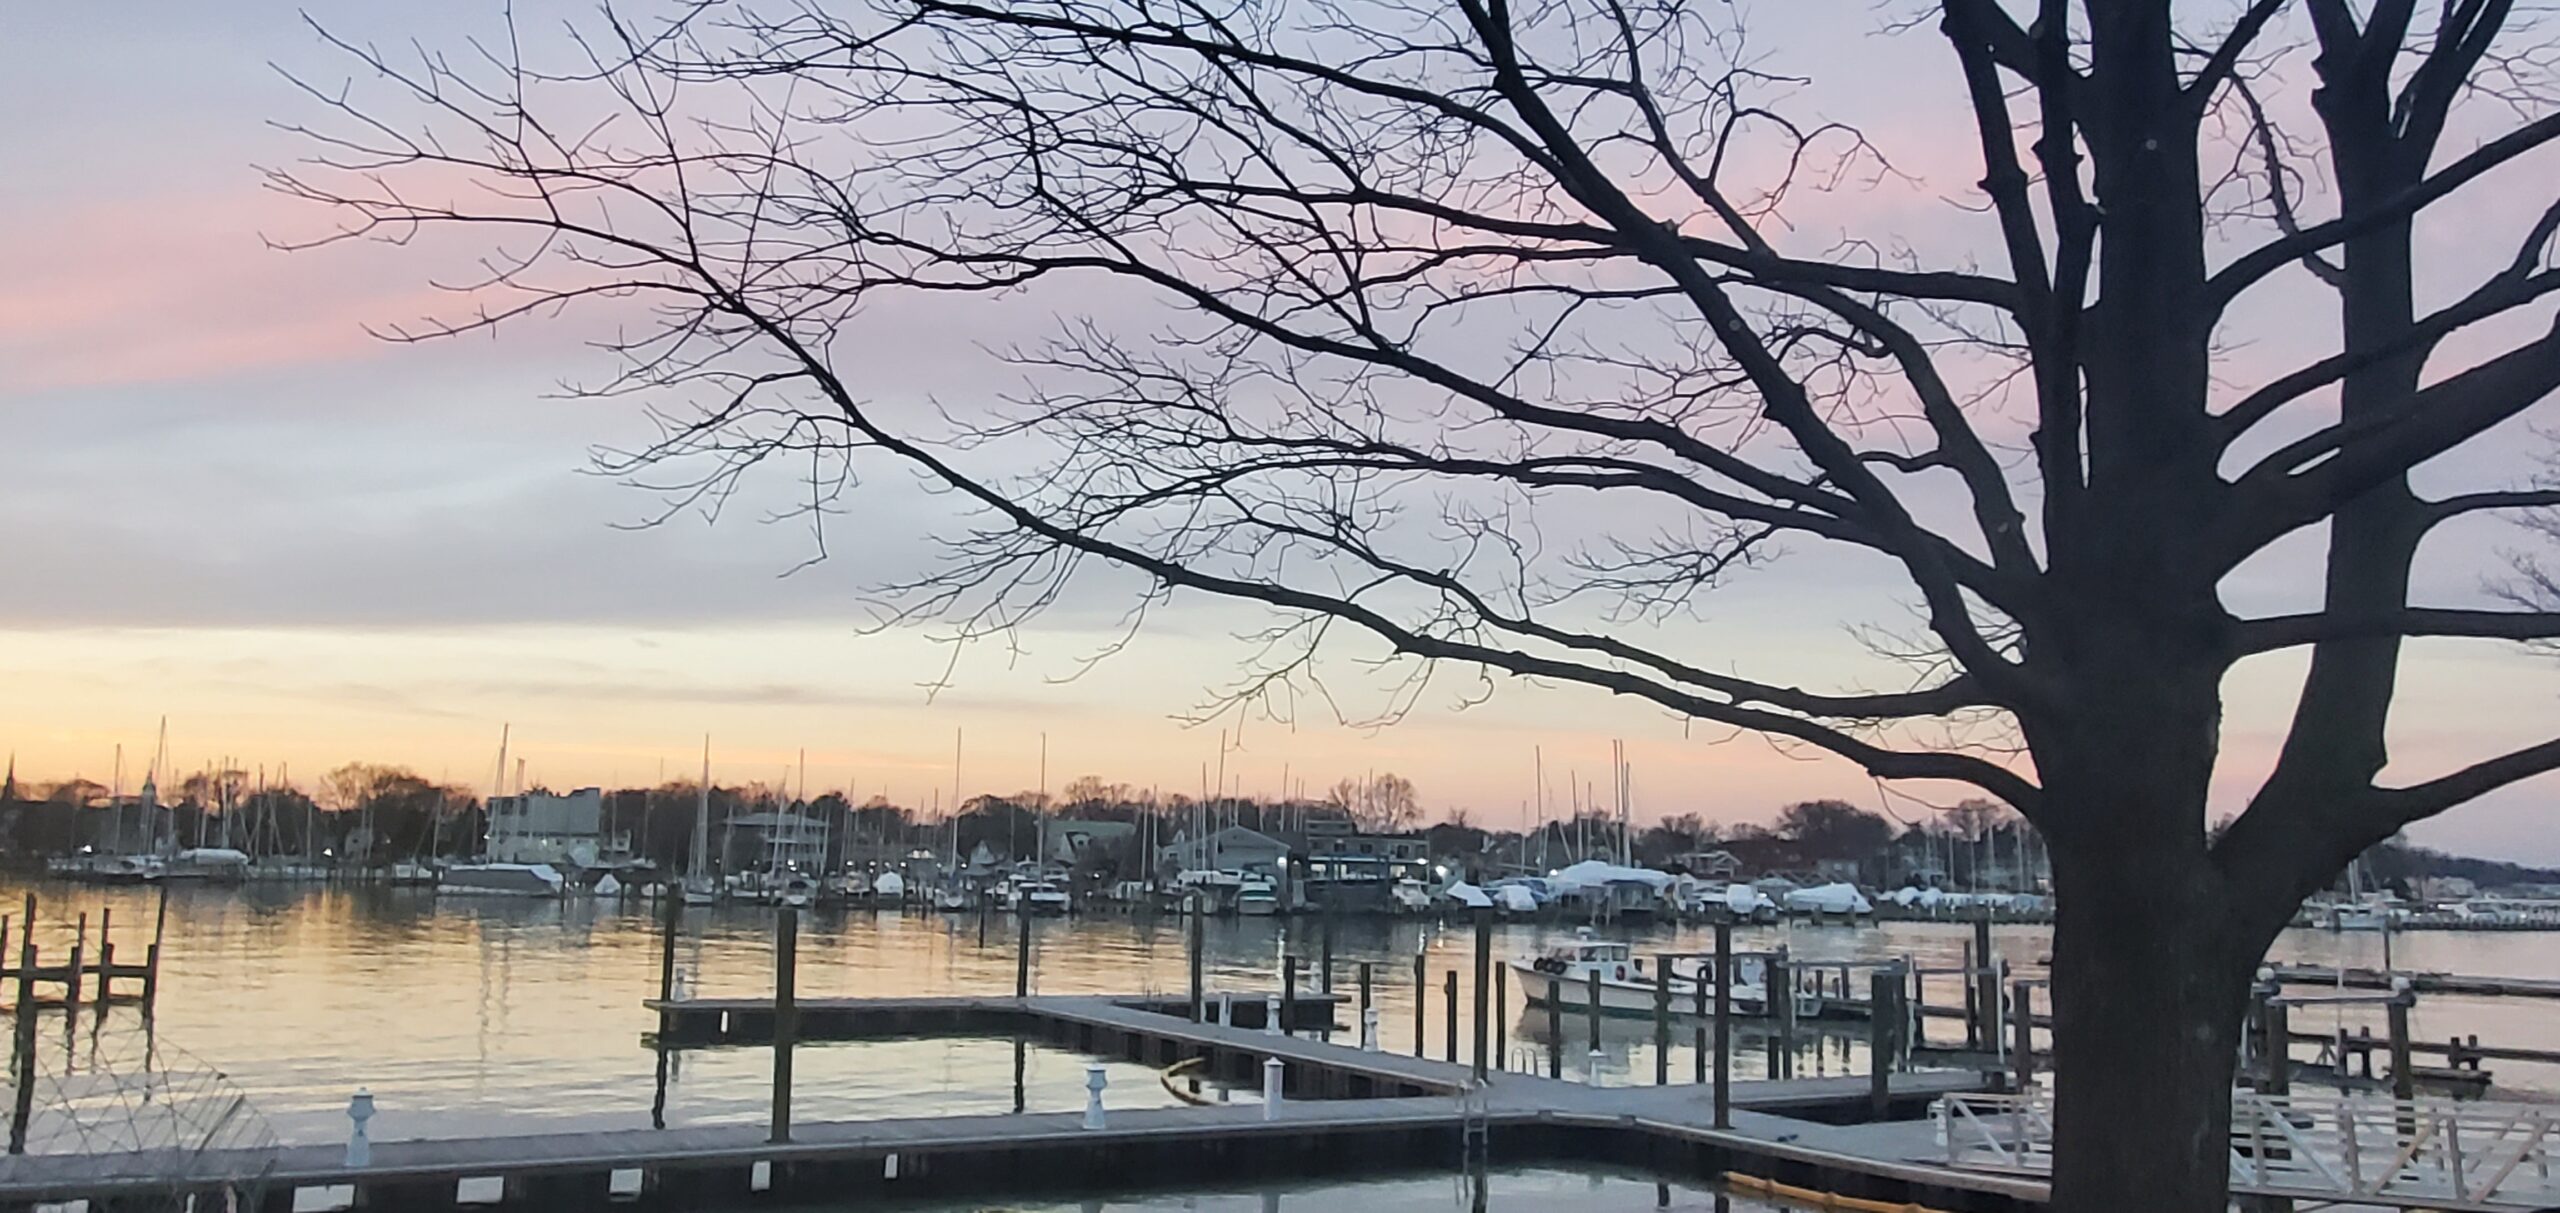 A photo of the Edwards Family Marina looking out over Back Creek at dusk